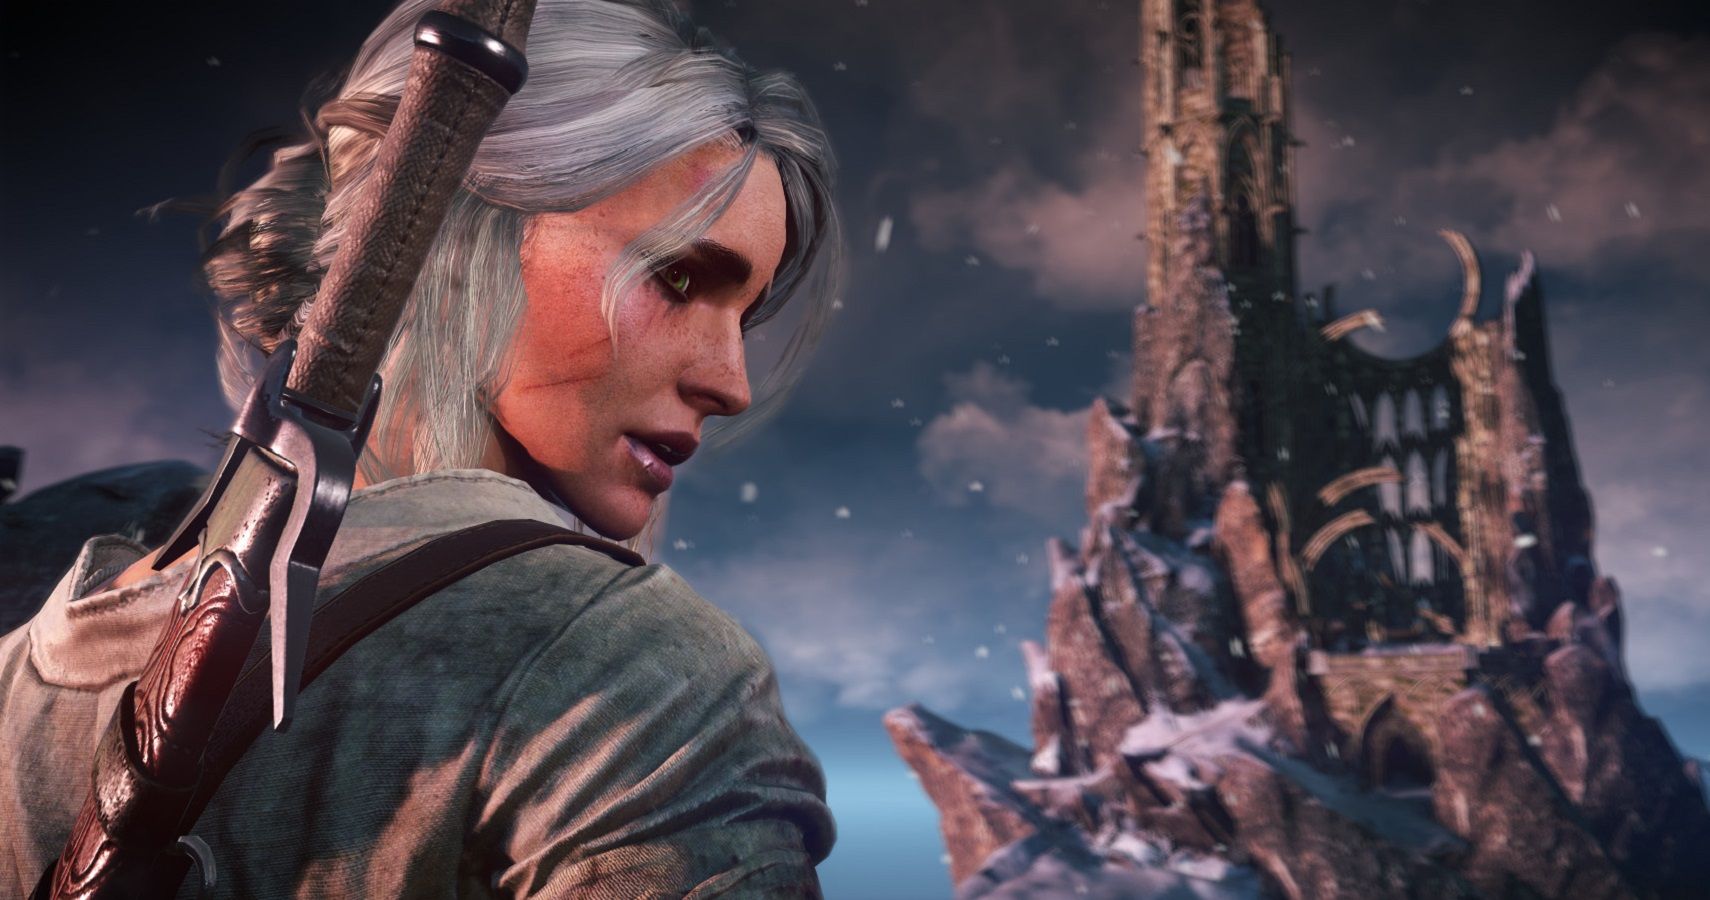 Console version of The Witcher may be cancelled – Destructoid